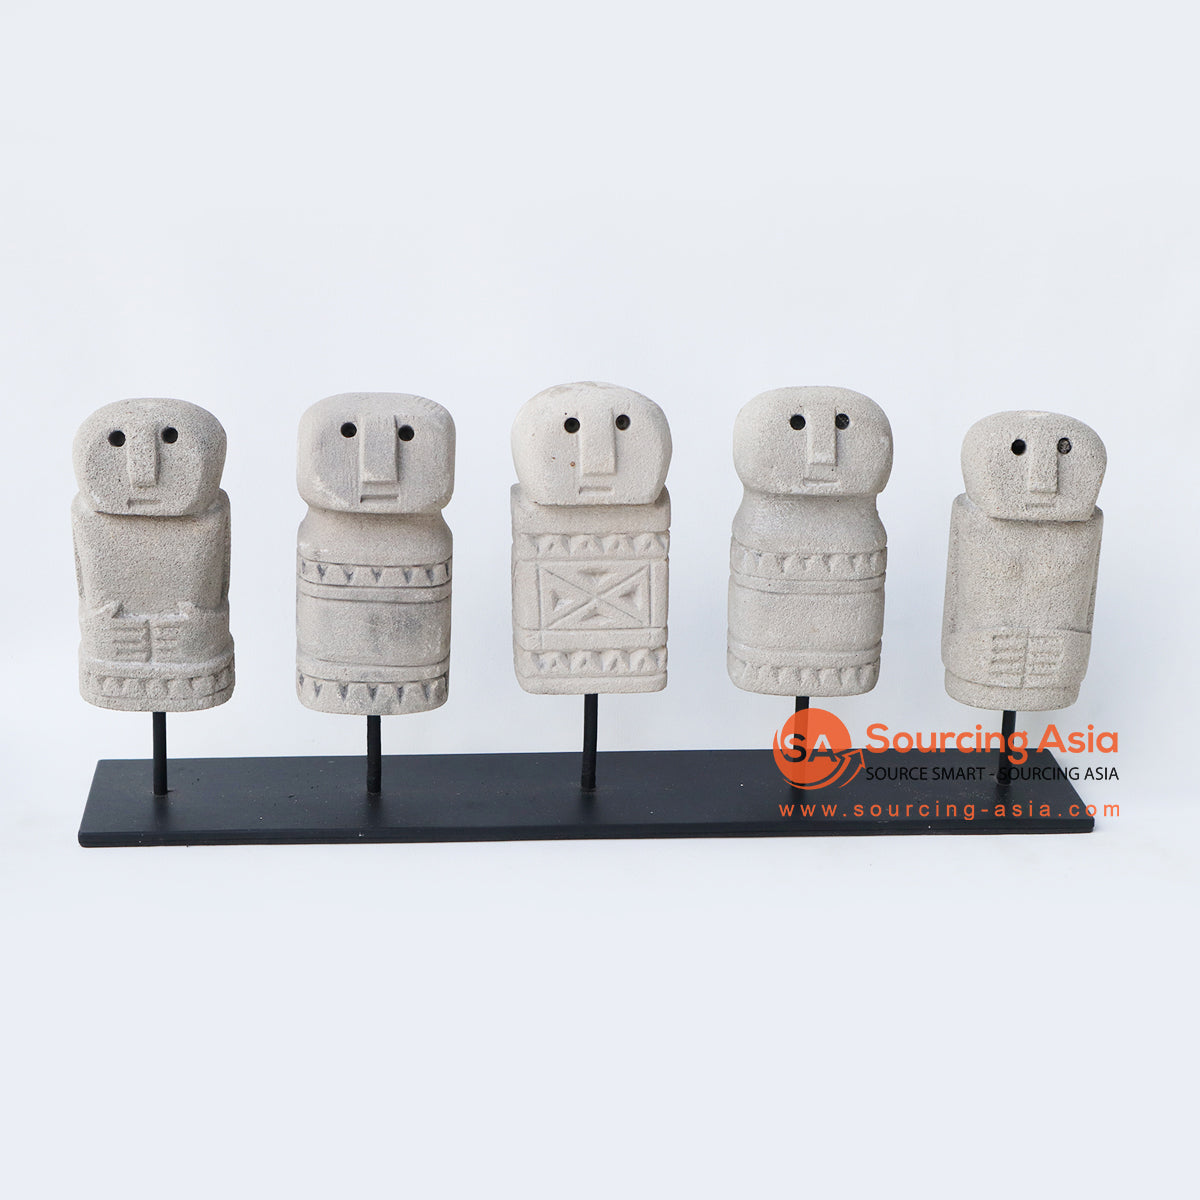 KNTC021 SET OF FIVE SUMBA PEOPLE STATUES ON STAND DECORATION